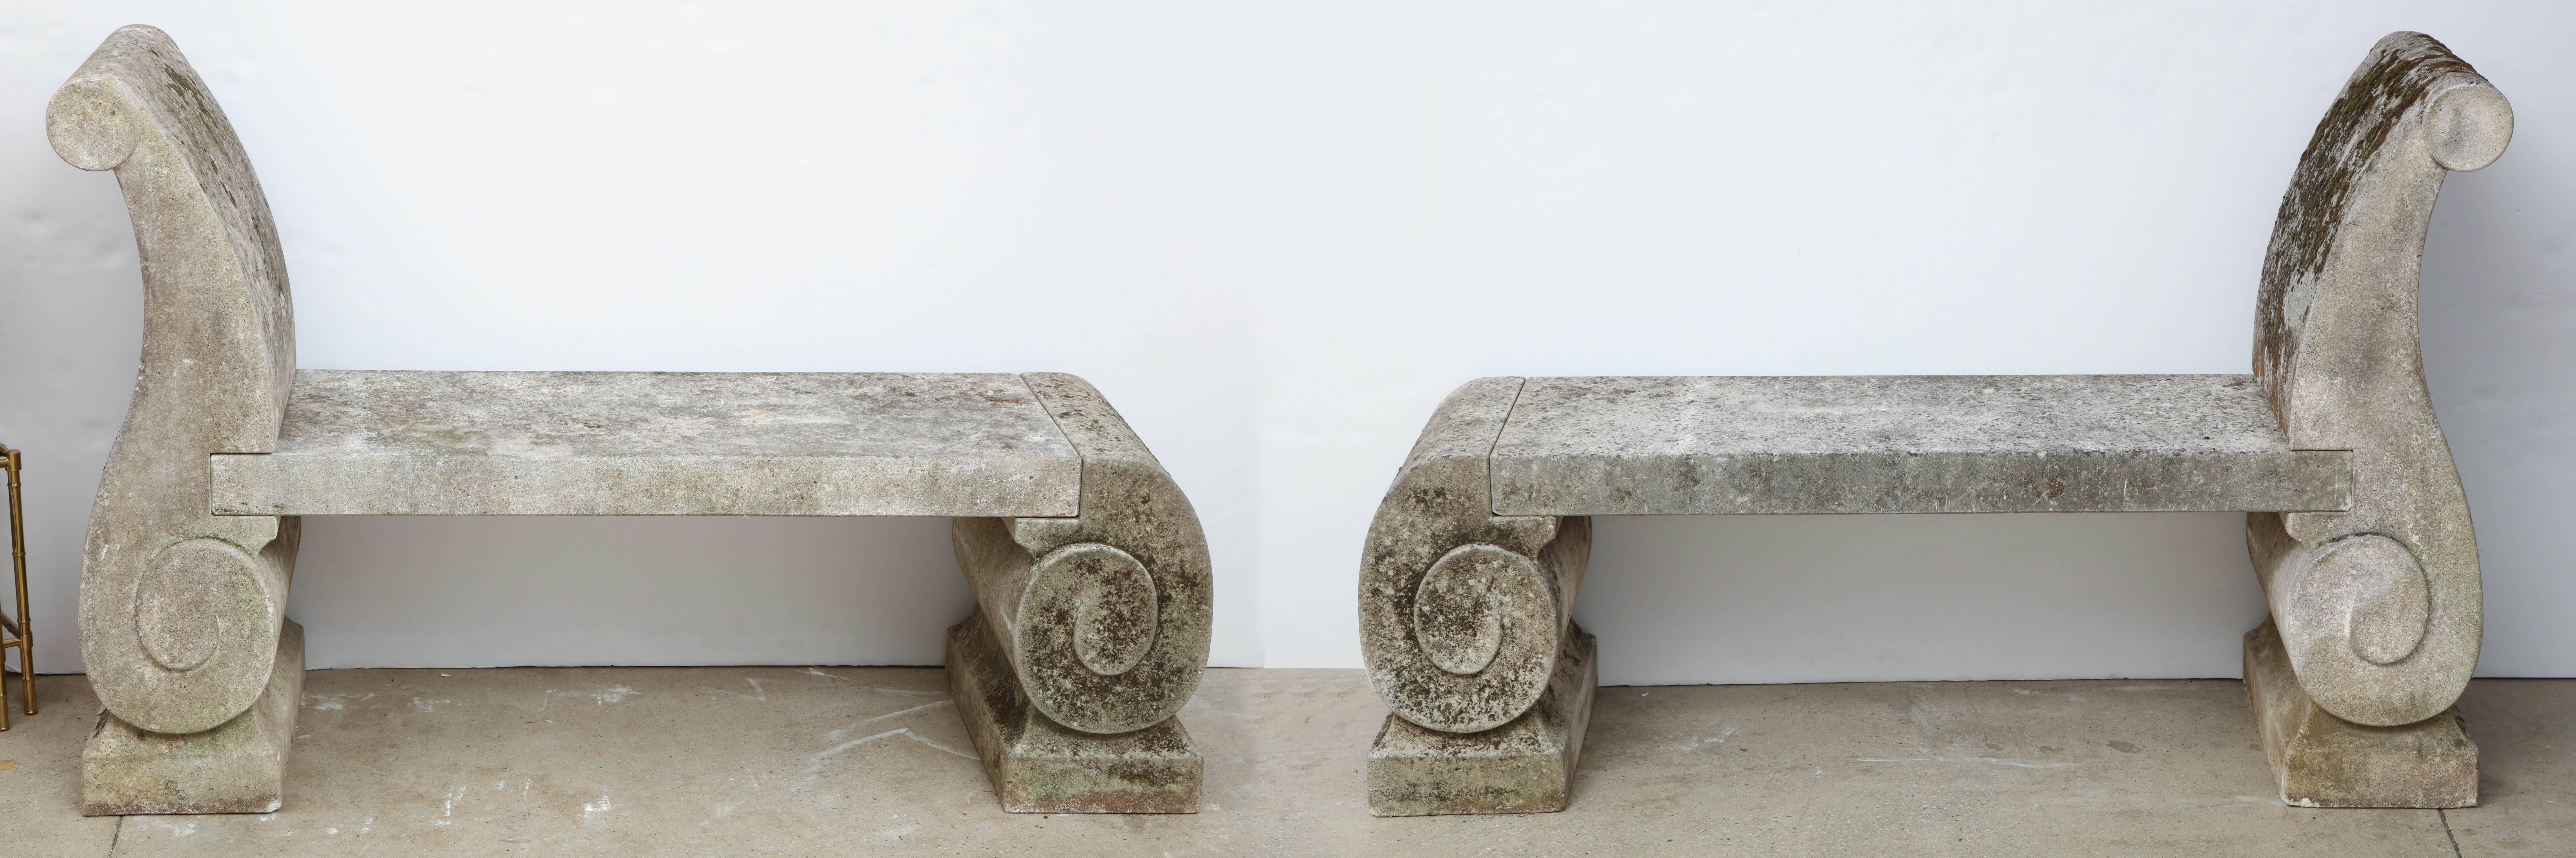 Pair of 1795 phenomenal carved limestone benches with exquisite detail, from a home along the Loire the longest river in France.